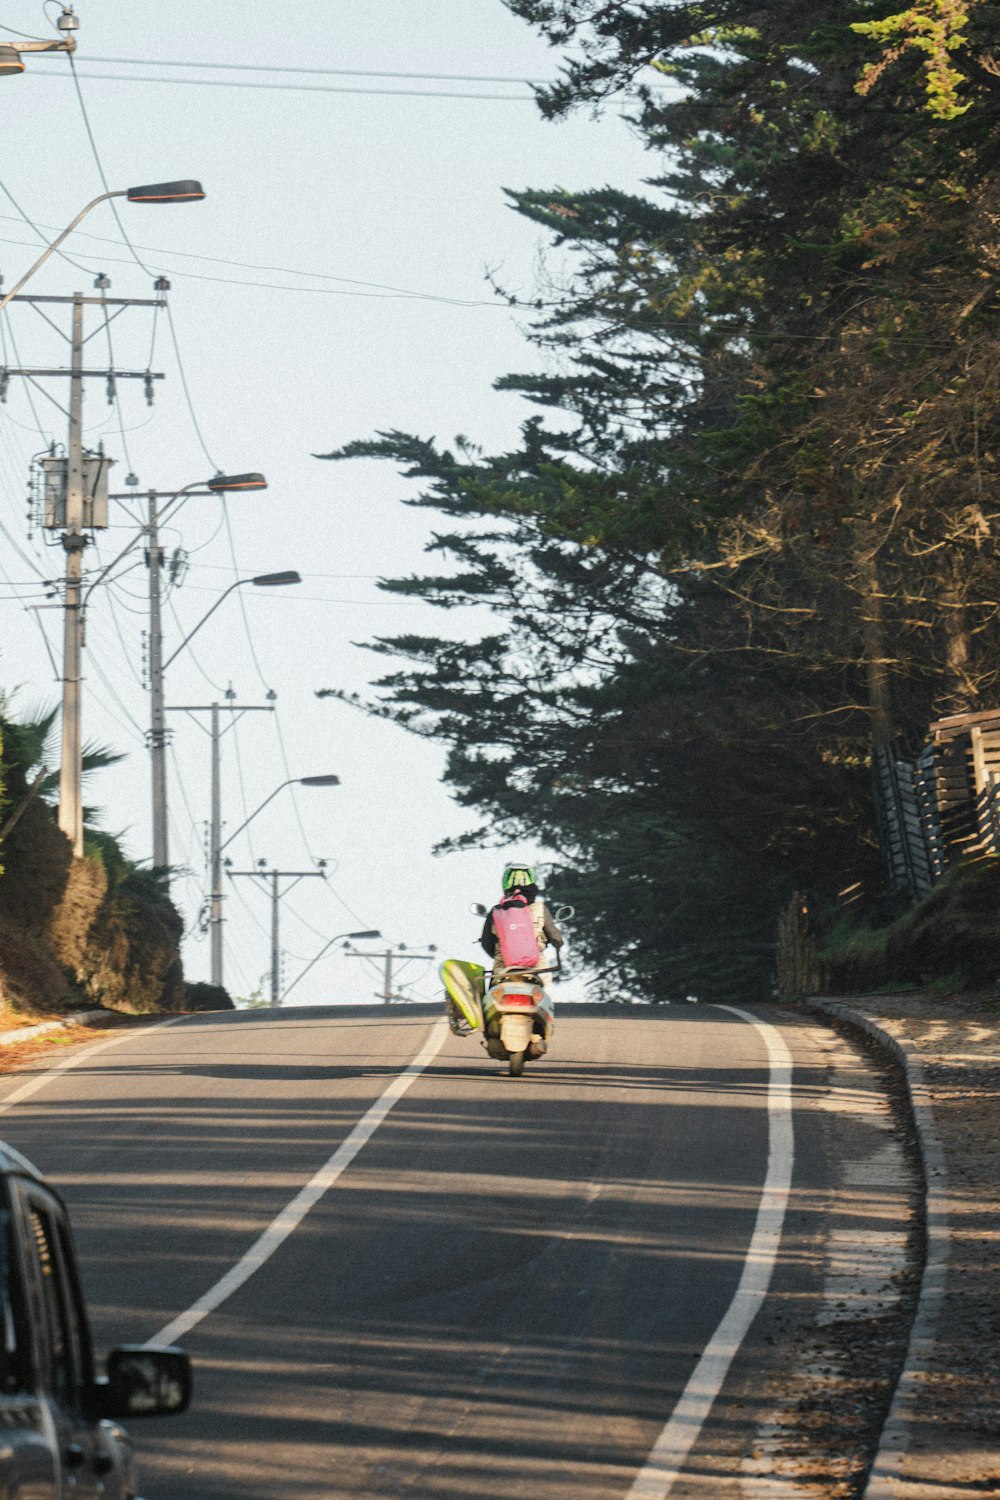 a person riding a motorcycle on a road